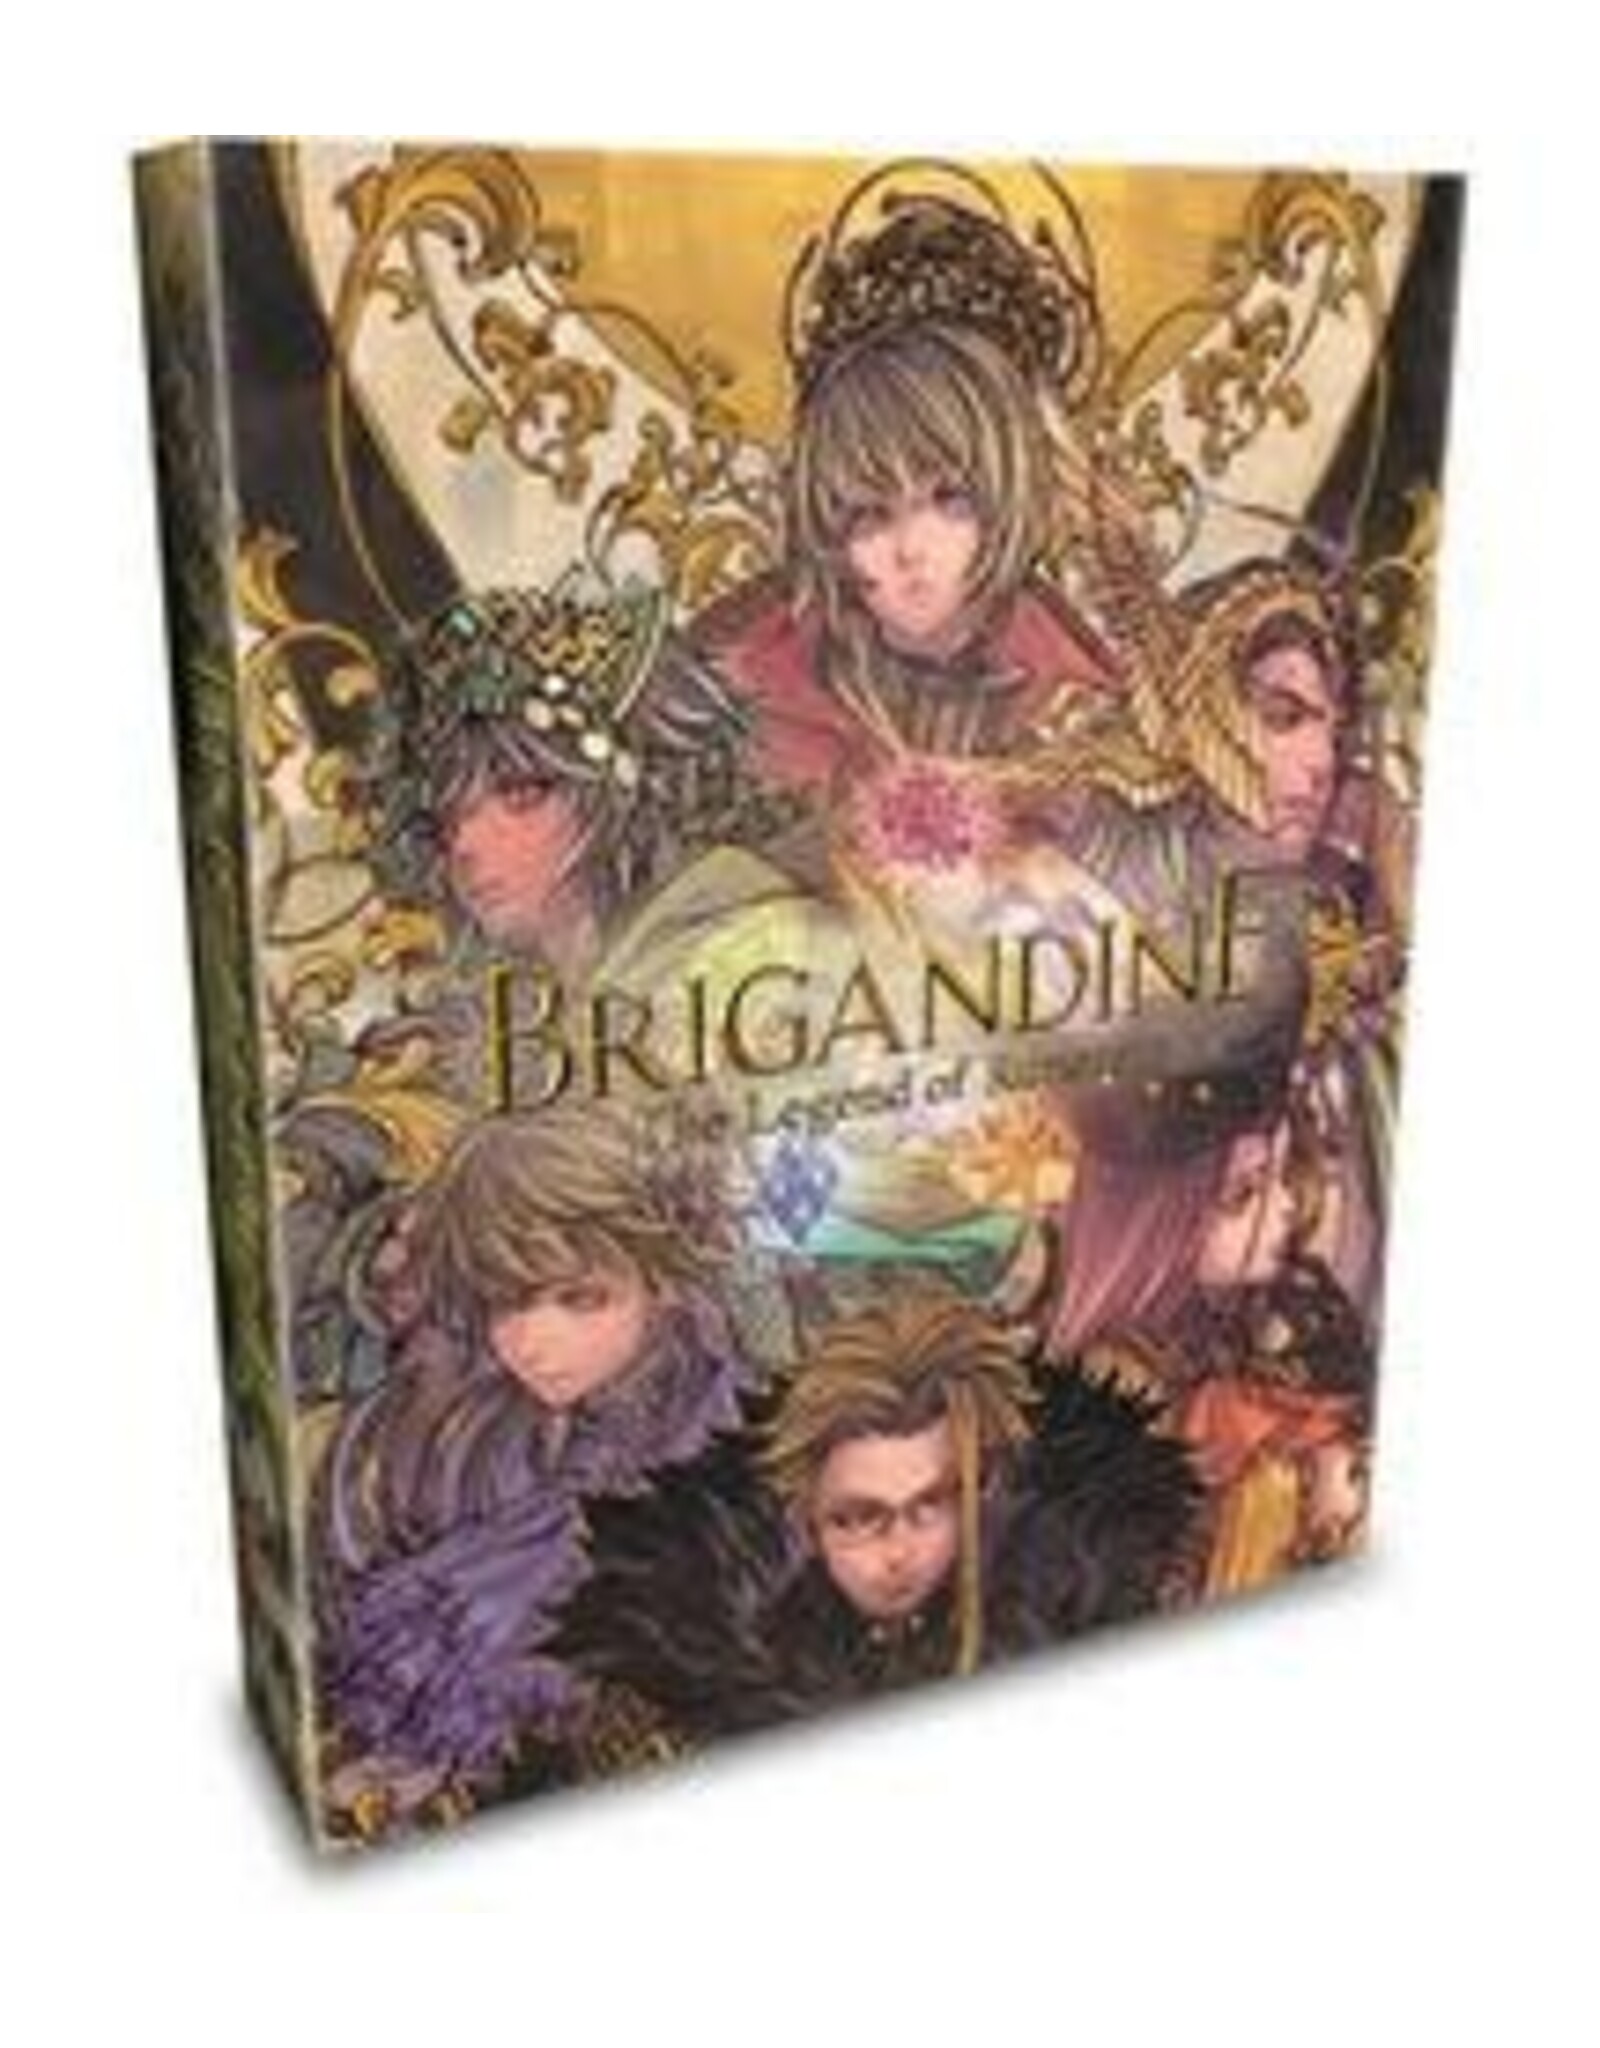 Playstation 4 Brigandine: The Legend of Runersia Collector's Edition - LRG #368 (PS4, Damaged Shrinkwrap)